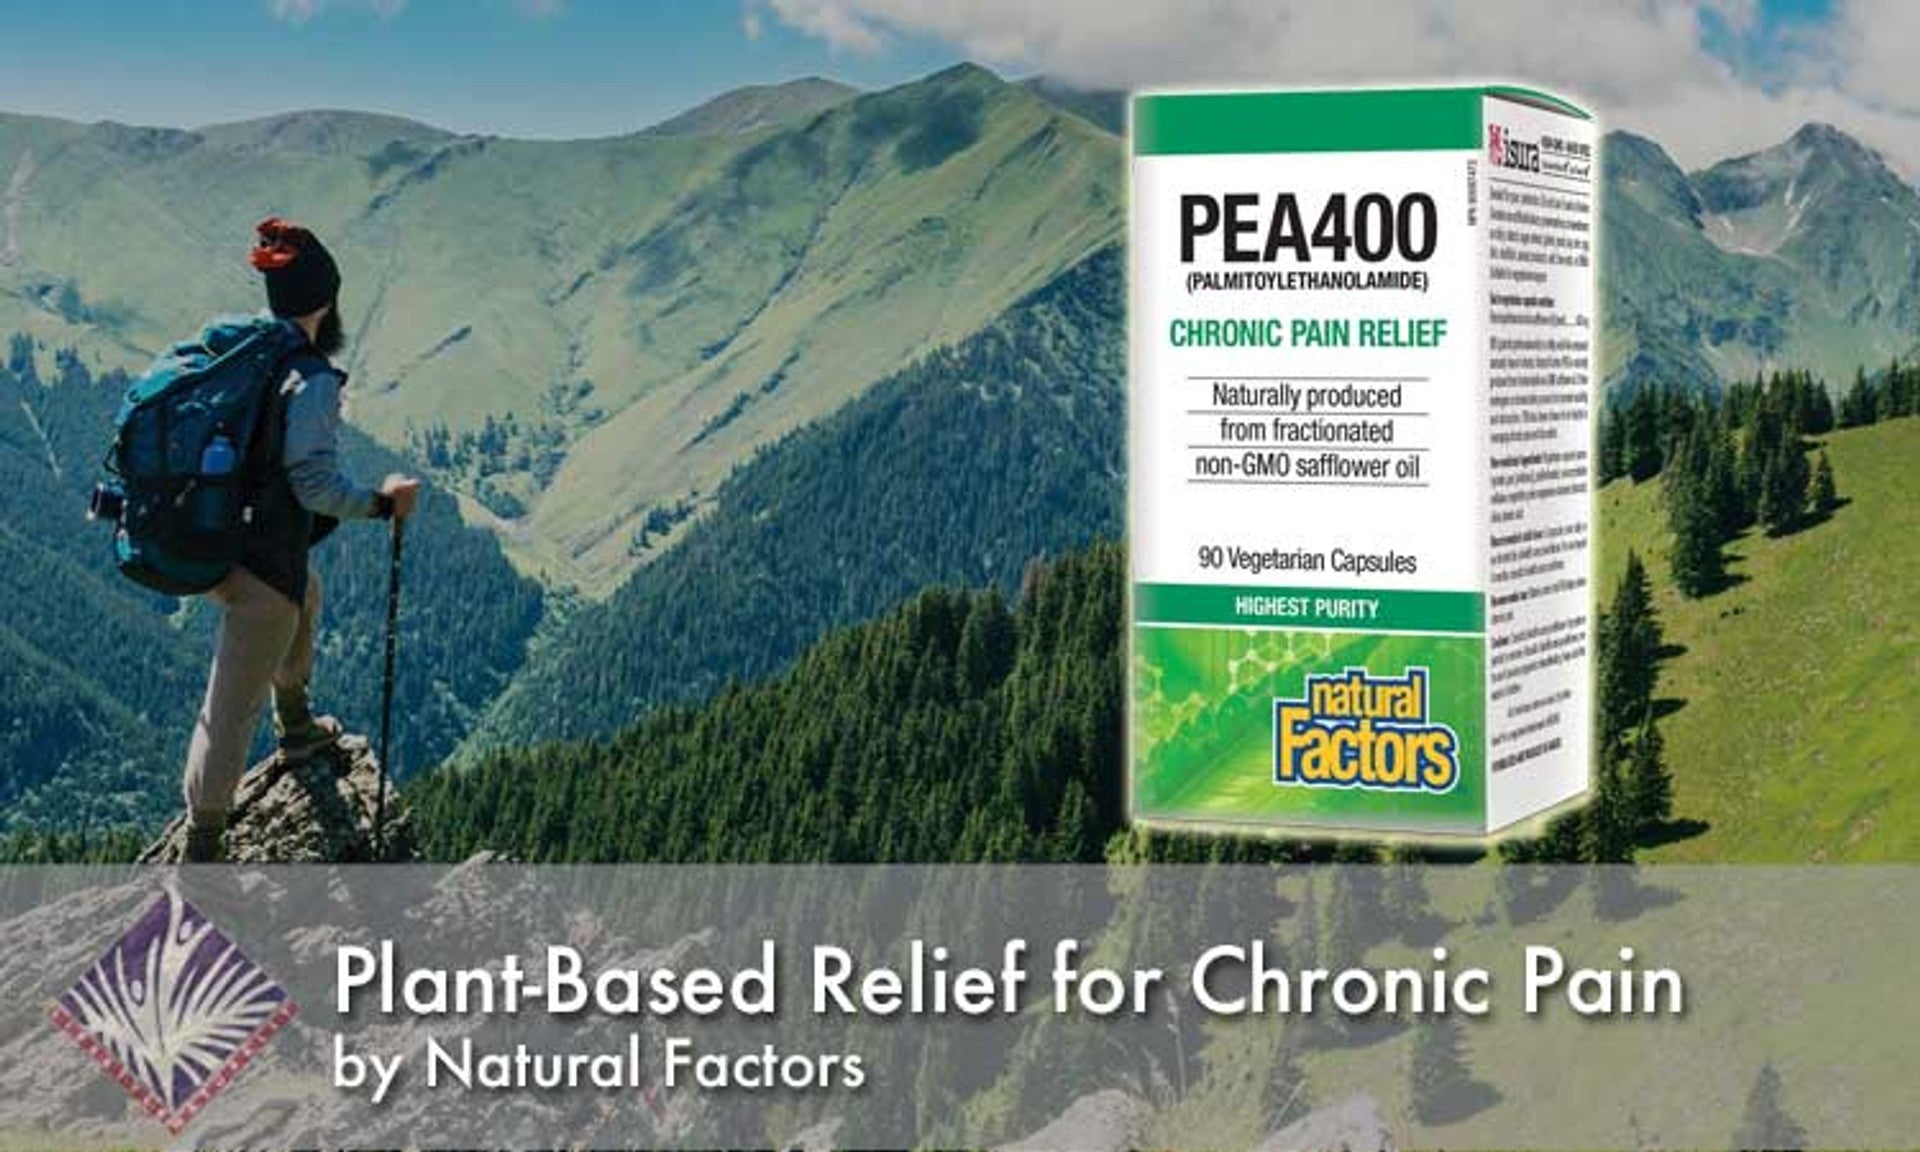 Plant-Based Relief for Chronic Pain